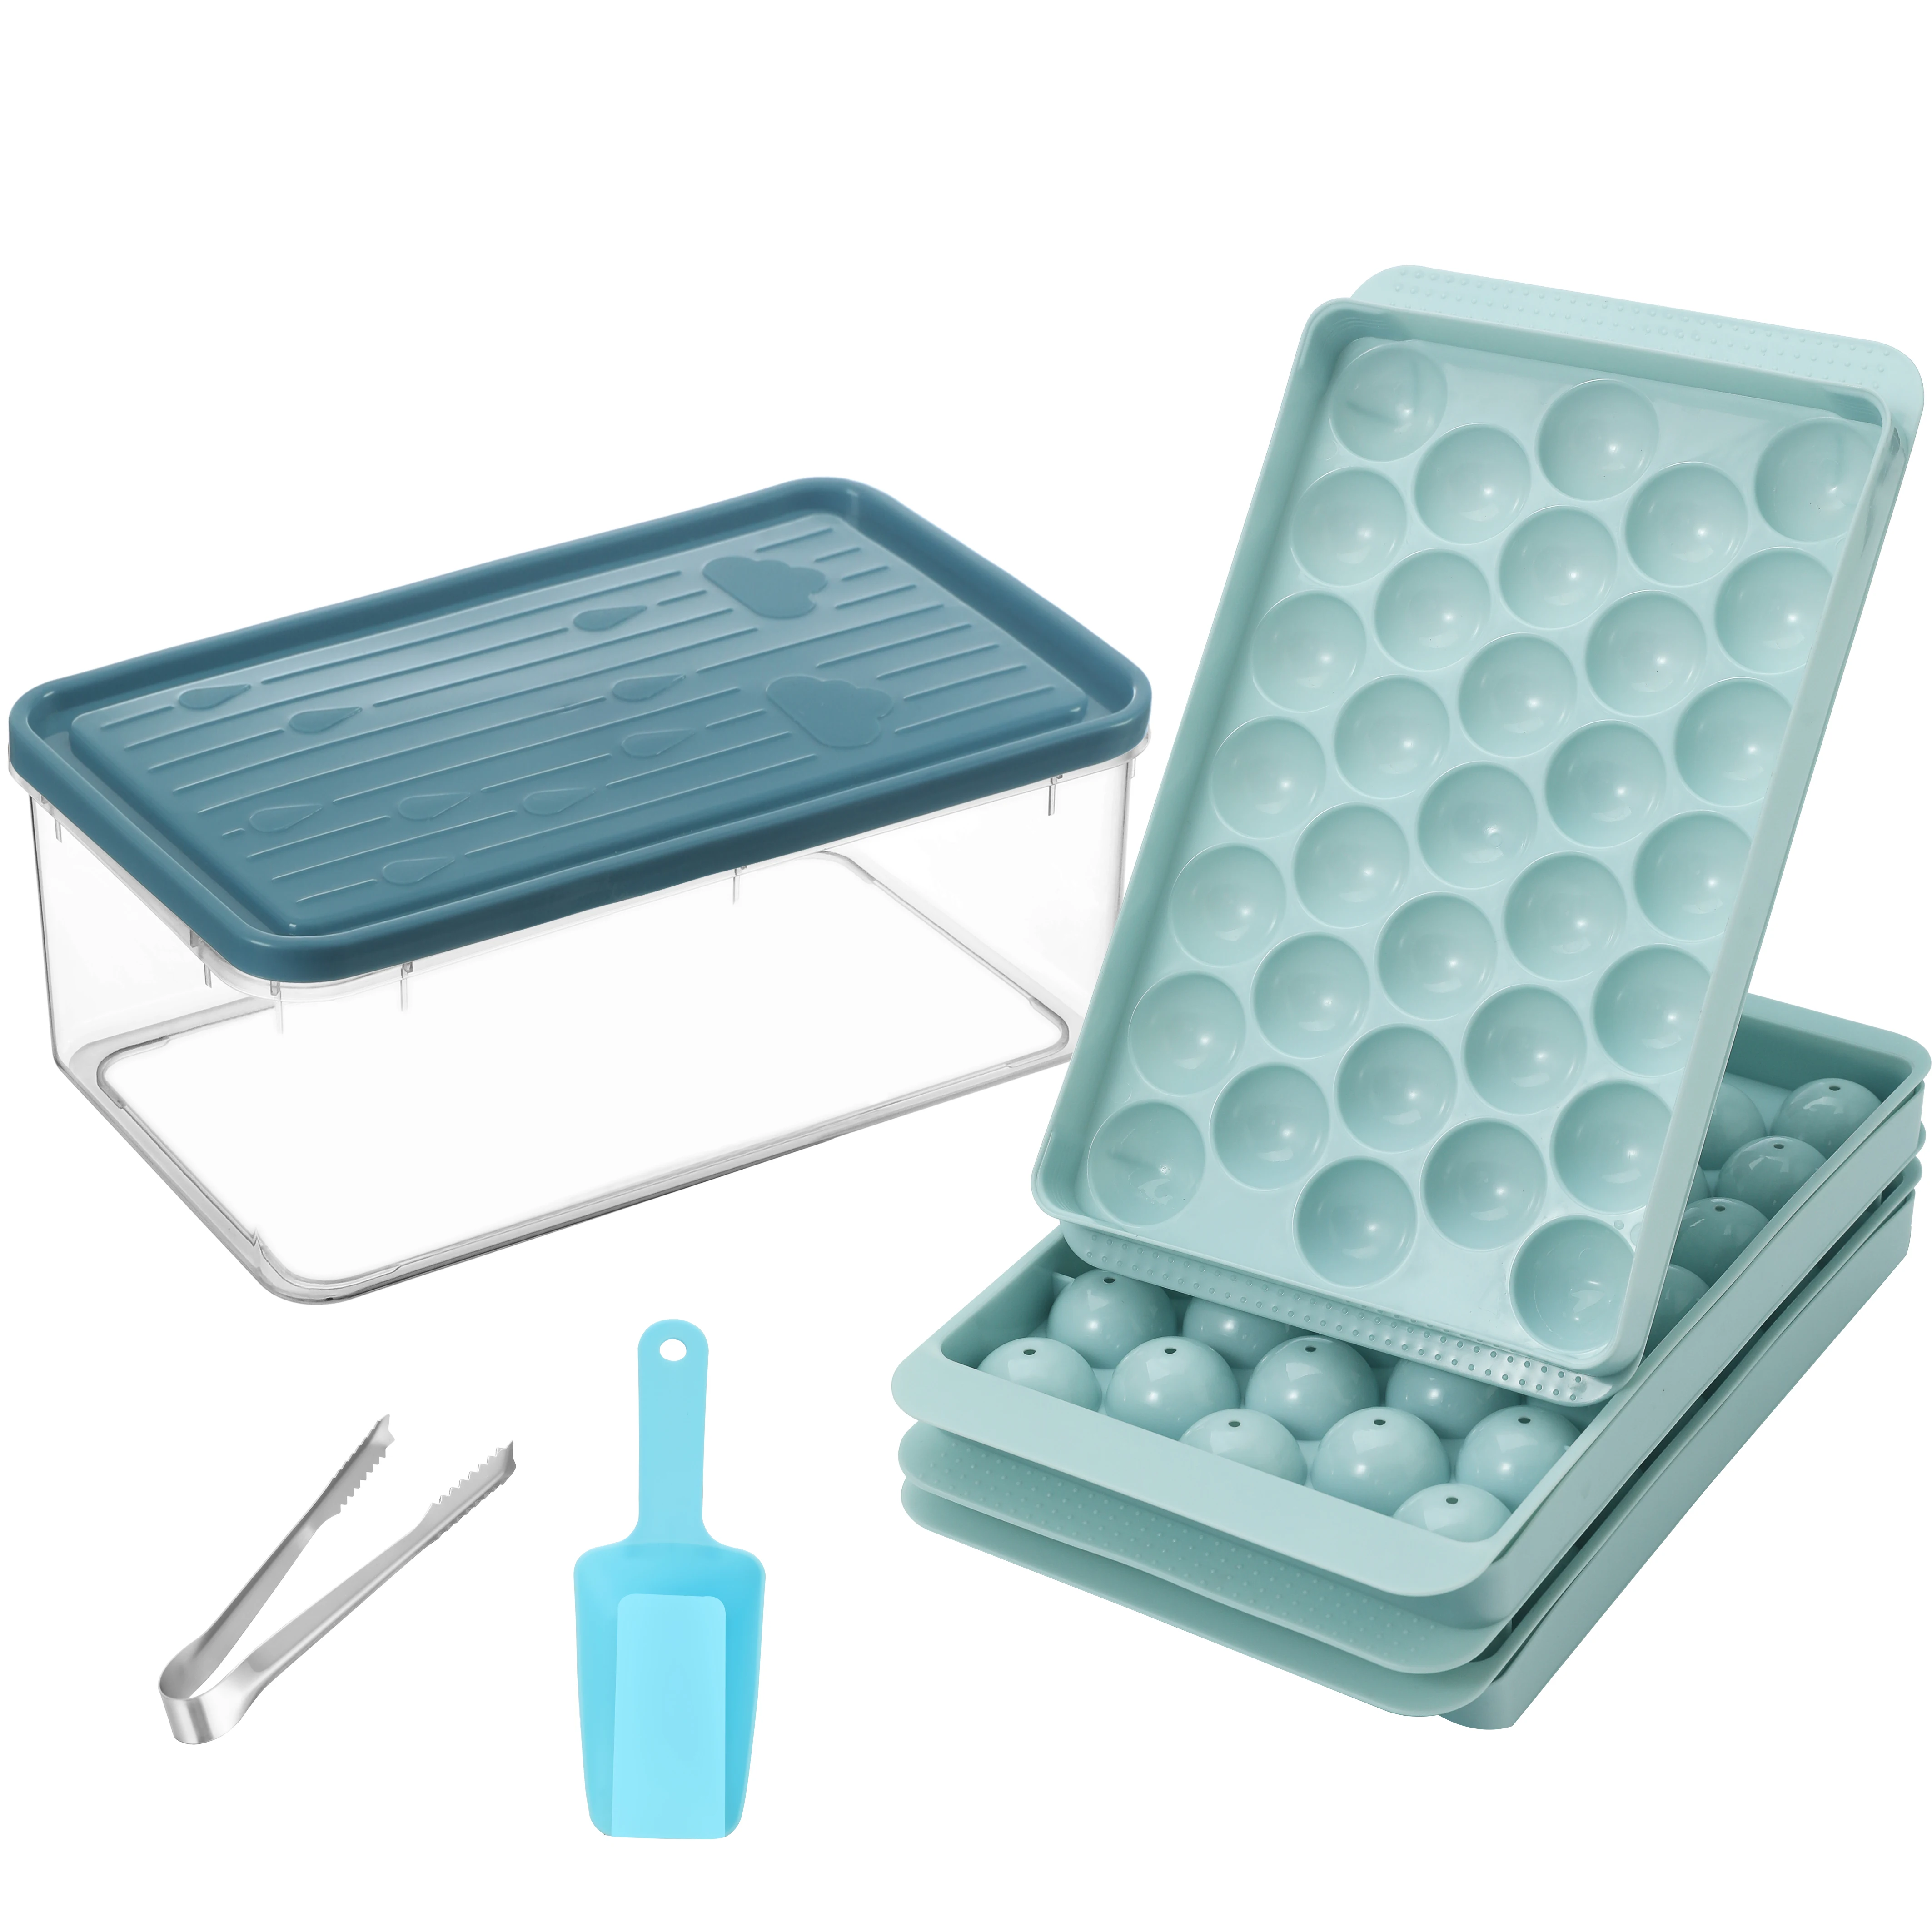 https://ae01.alicdn.com/kf/S9337d8246f954dcdab439be0776ef66fN/Ice-Cube-Tray-Set-with-Lid-2-Pack-Stackable-Circle-Ice-Tray-for-Freezer-66-Round.jpg